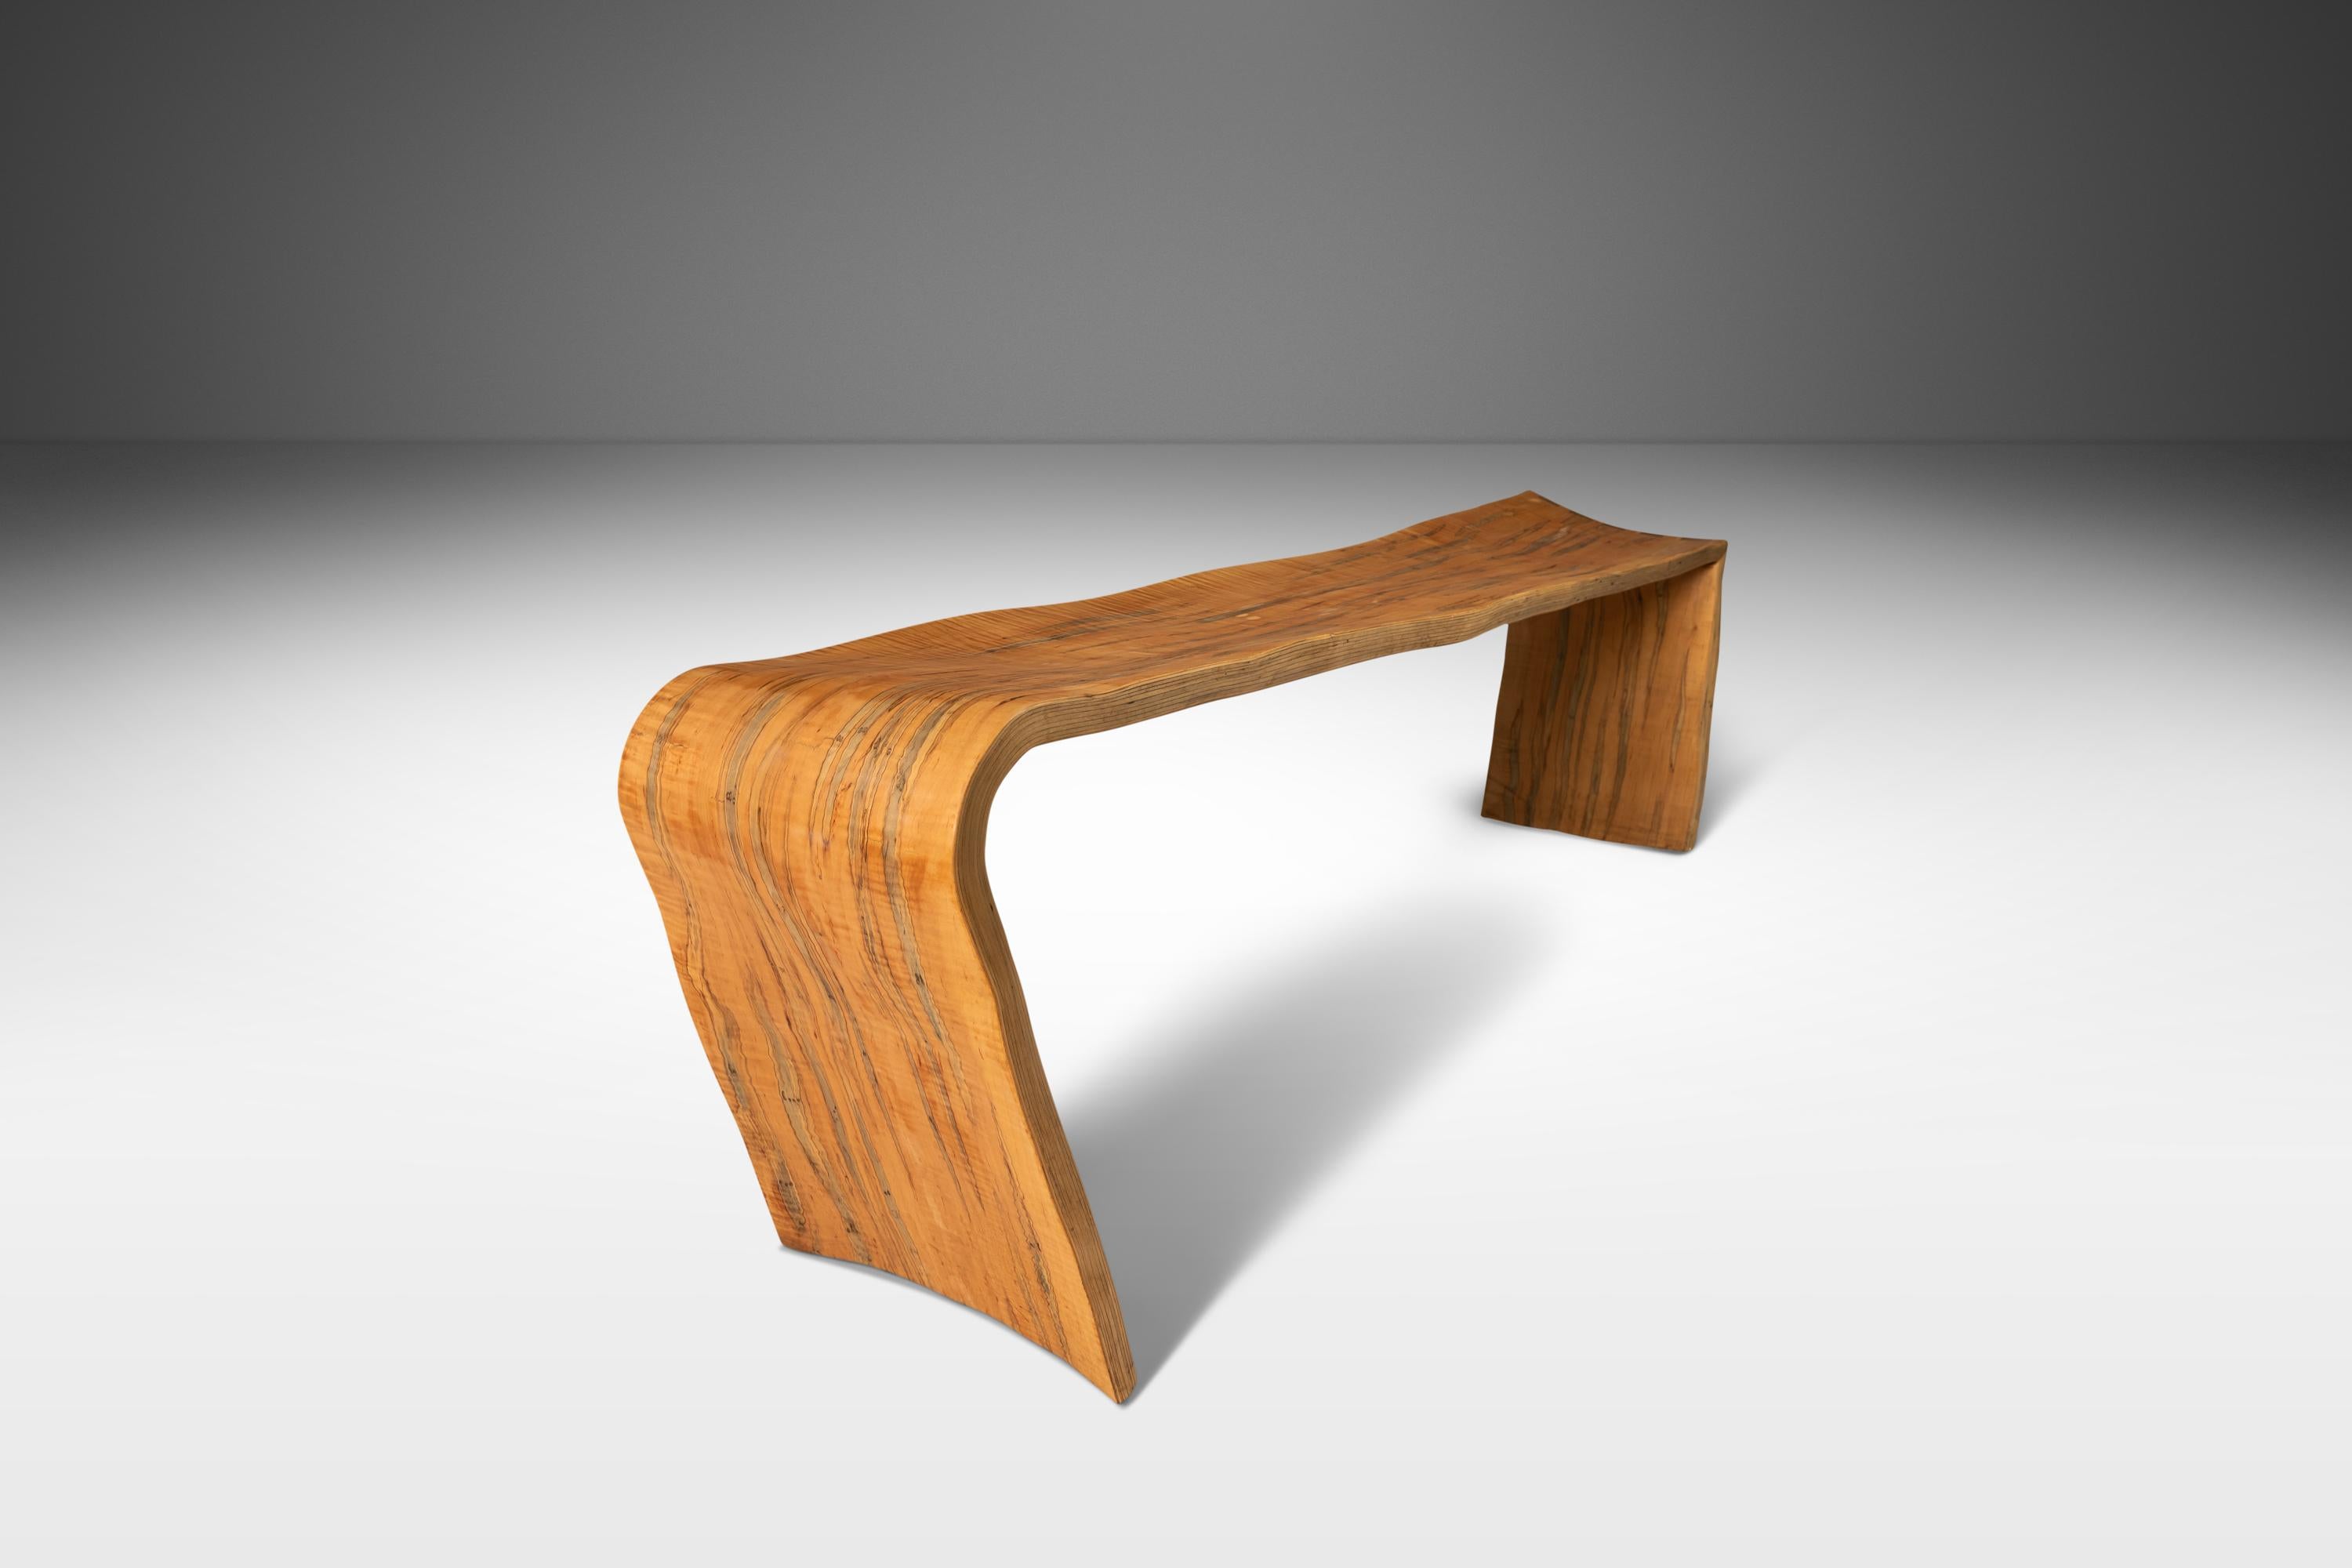 Bentwood Asymmetrical Abstract Three Seater Bench in Ambrosia Maple, Usa, 1980s For Sale 4